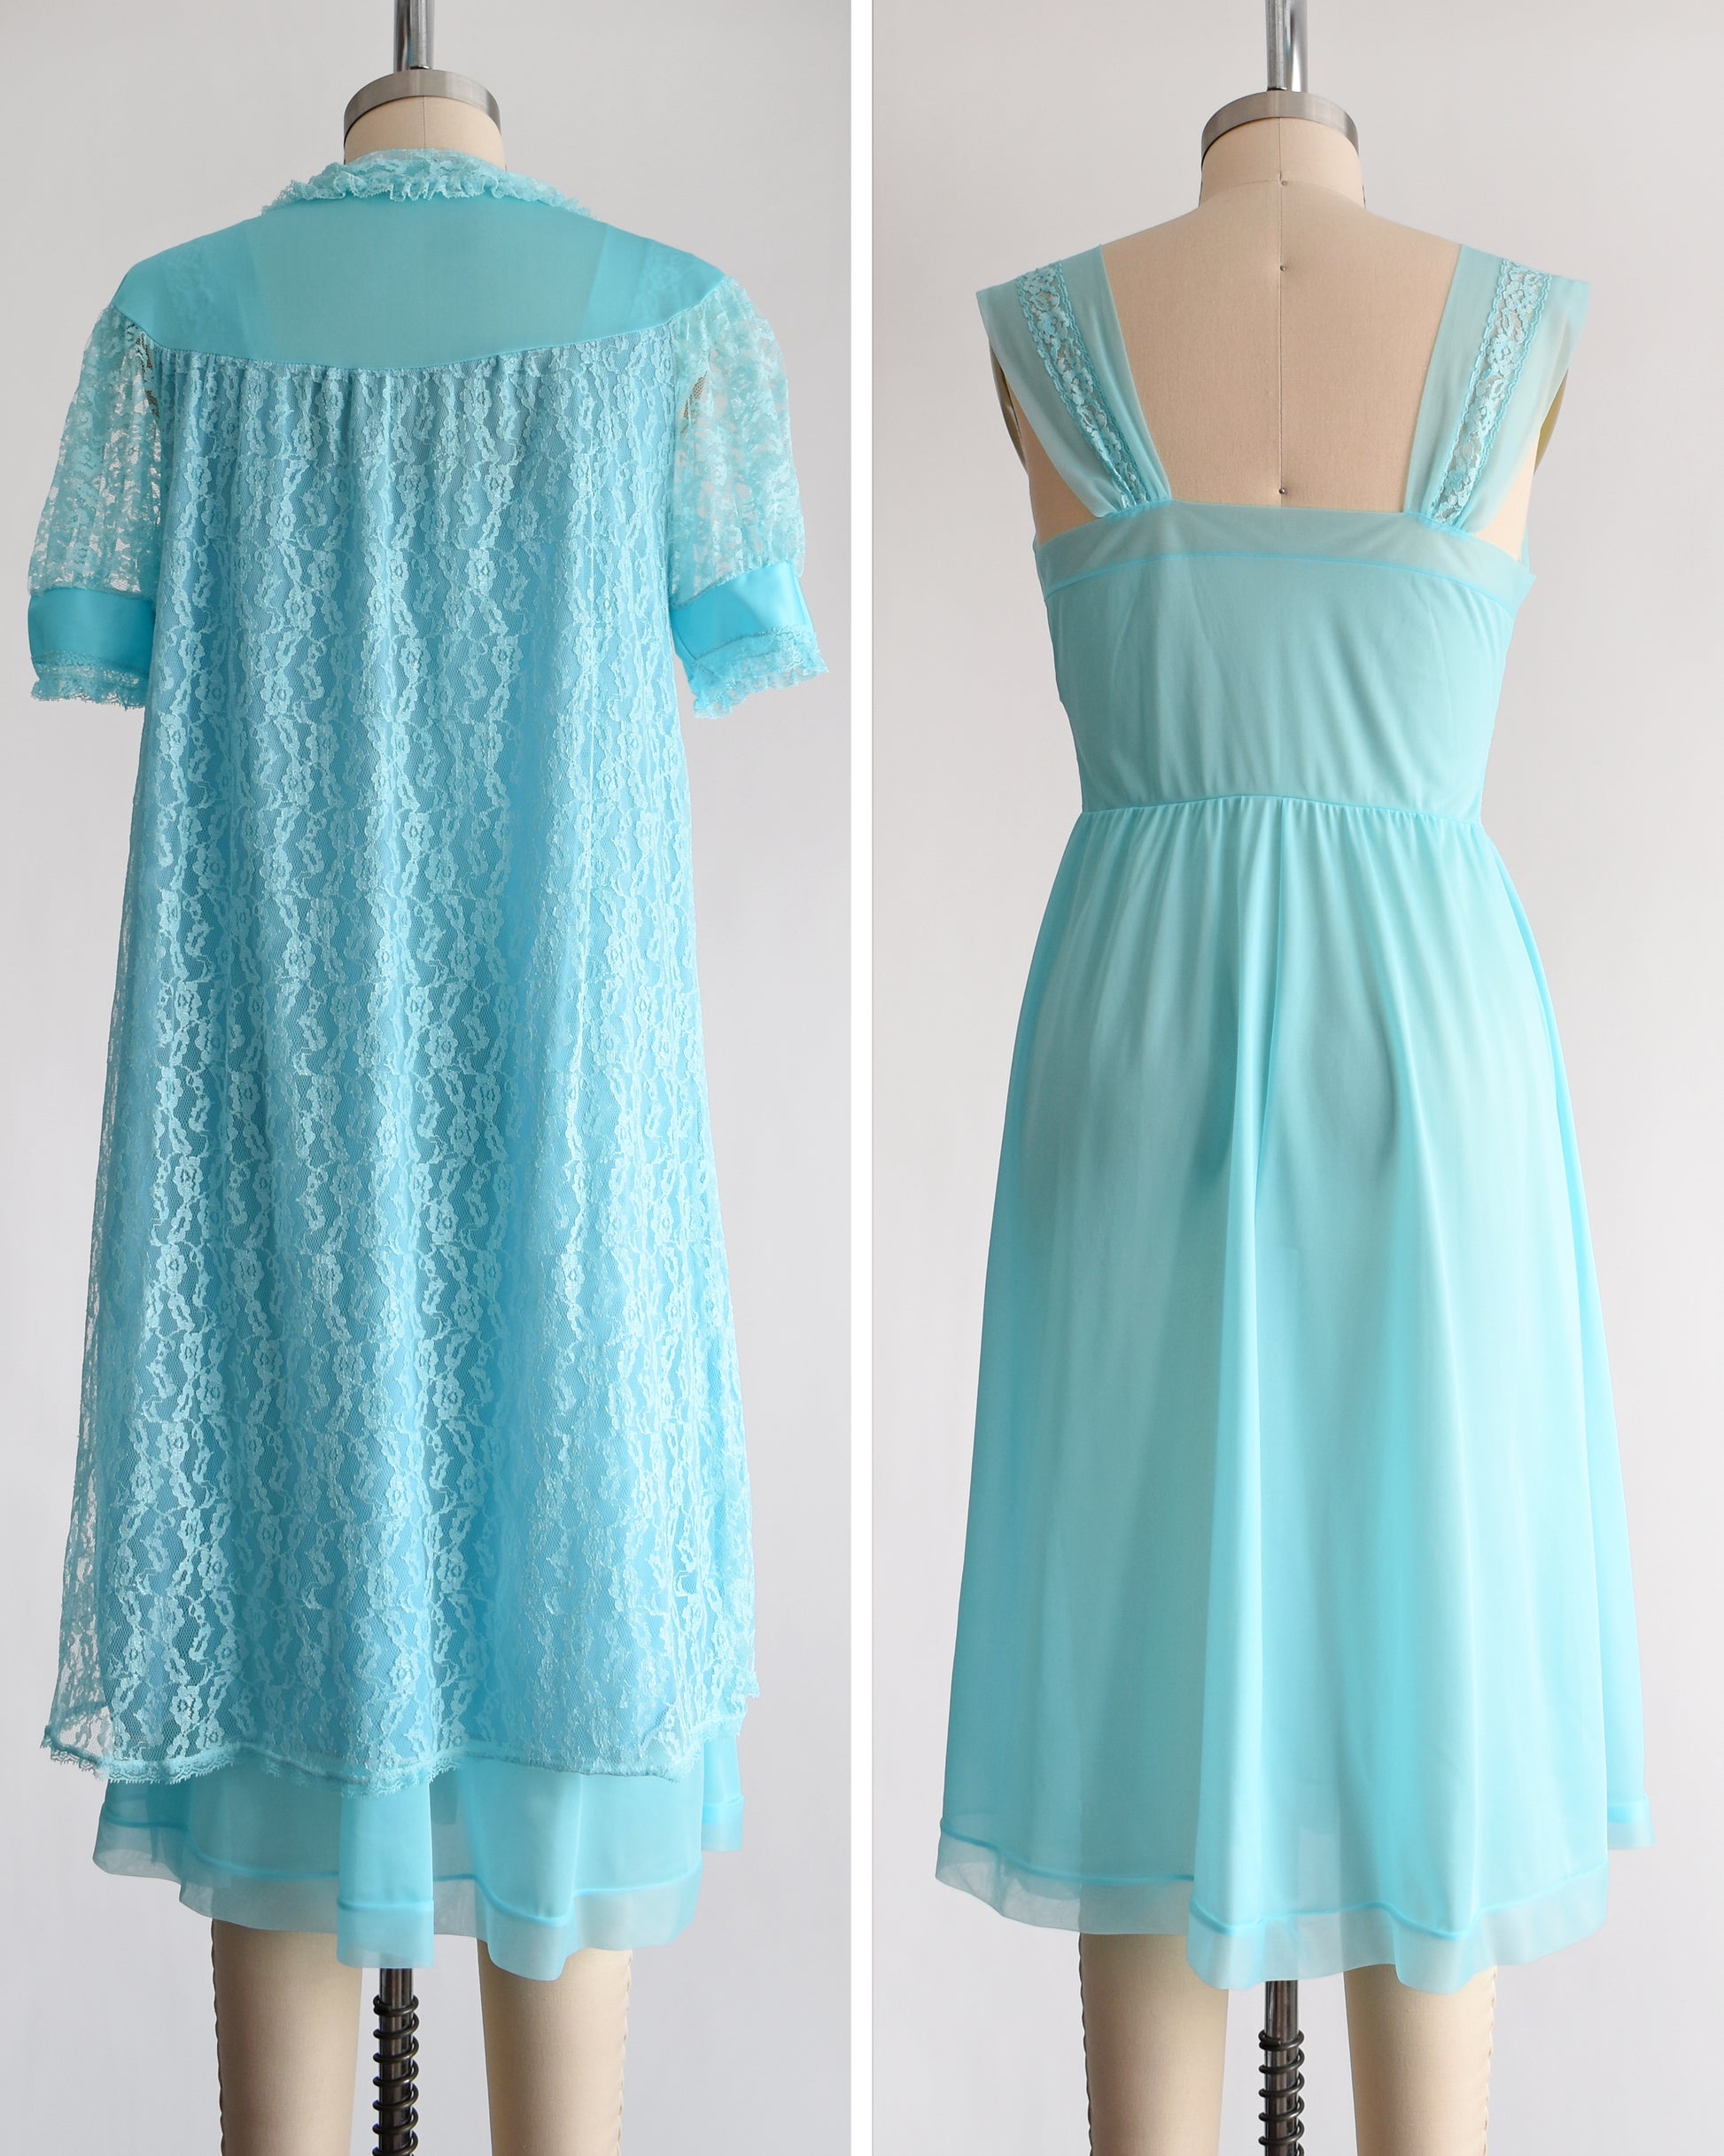 Side by back views of a A vintage 1960s aqua blue peignoir set that comes with a lace robe and matching nightgown. The left shows the robe and the right only shows the nightgown